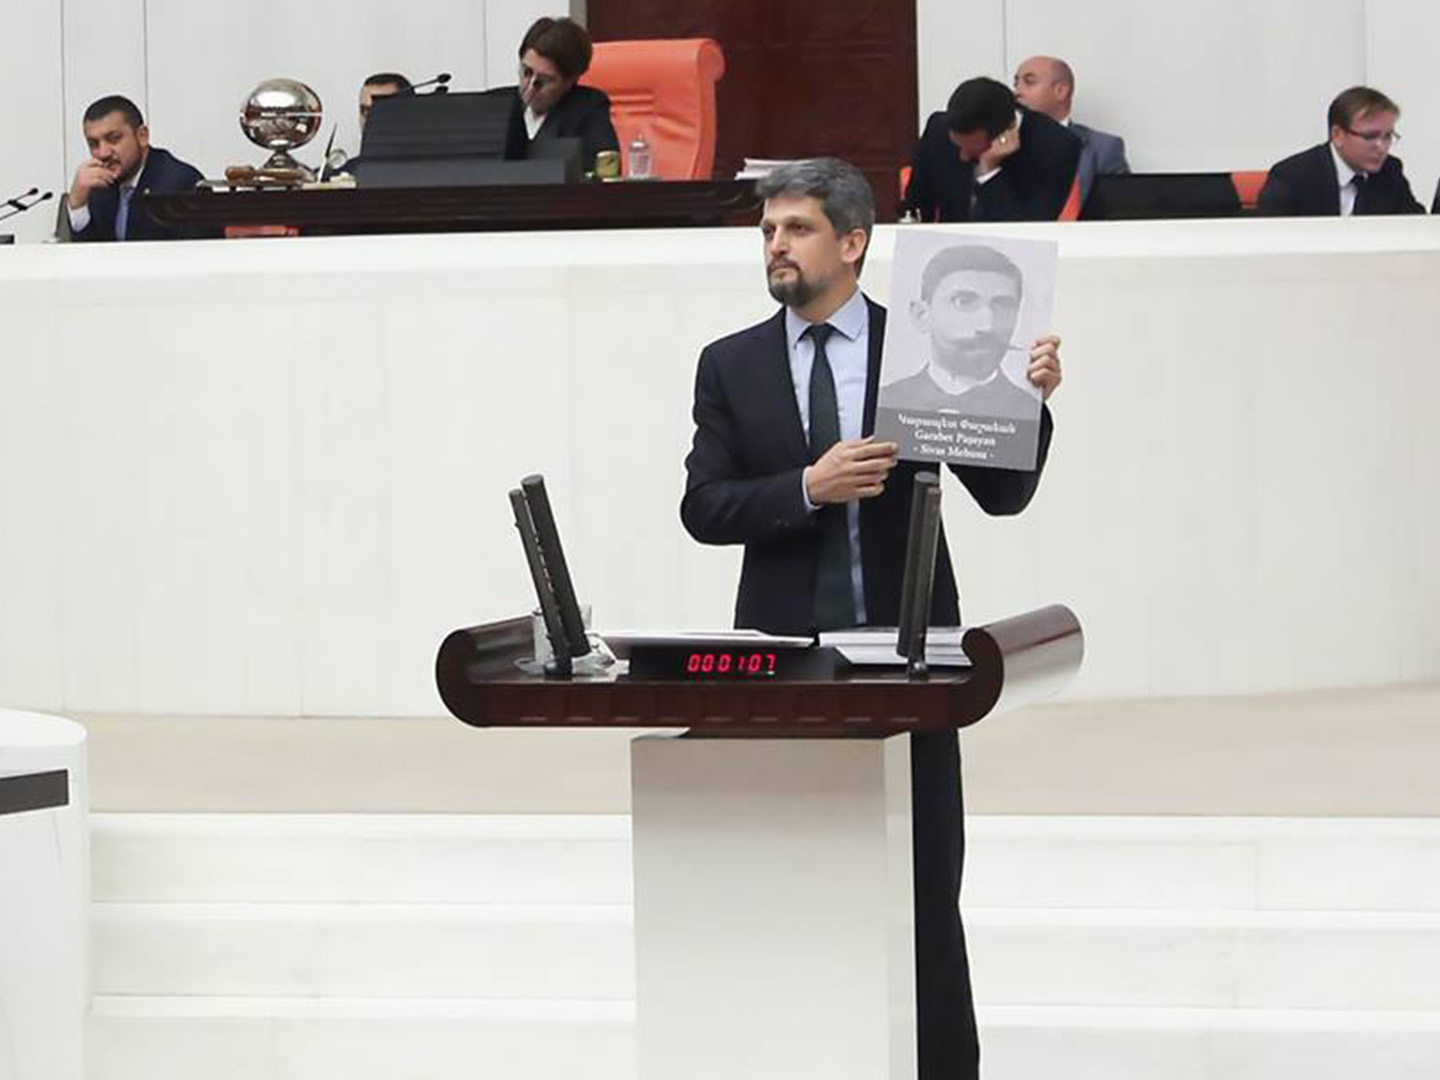 Garo Paylan addressing the Turkish Parliament on April 21, 2016 when he called for an investigation into the killing of Armenian members of the Parliament during the Armenian Genocide.